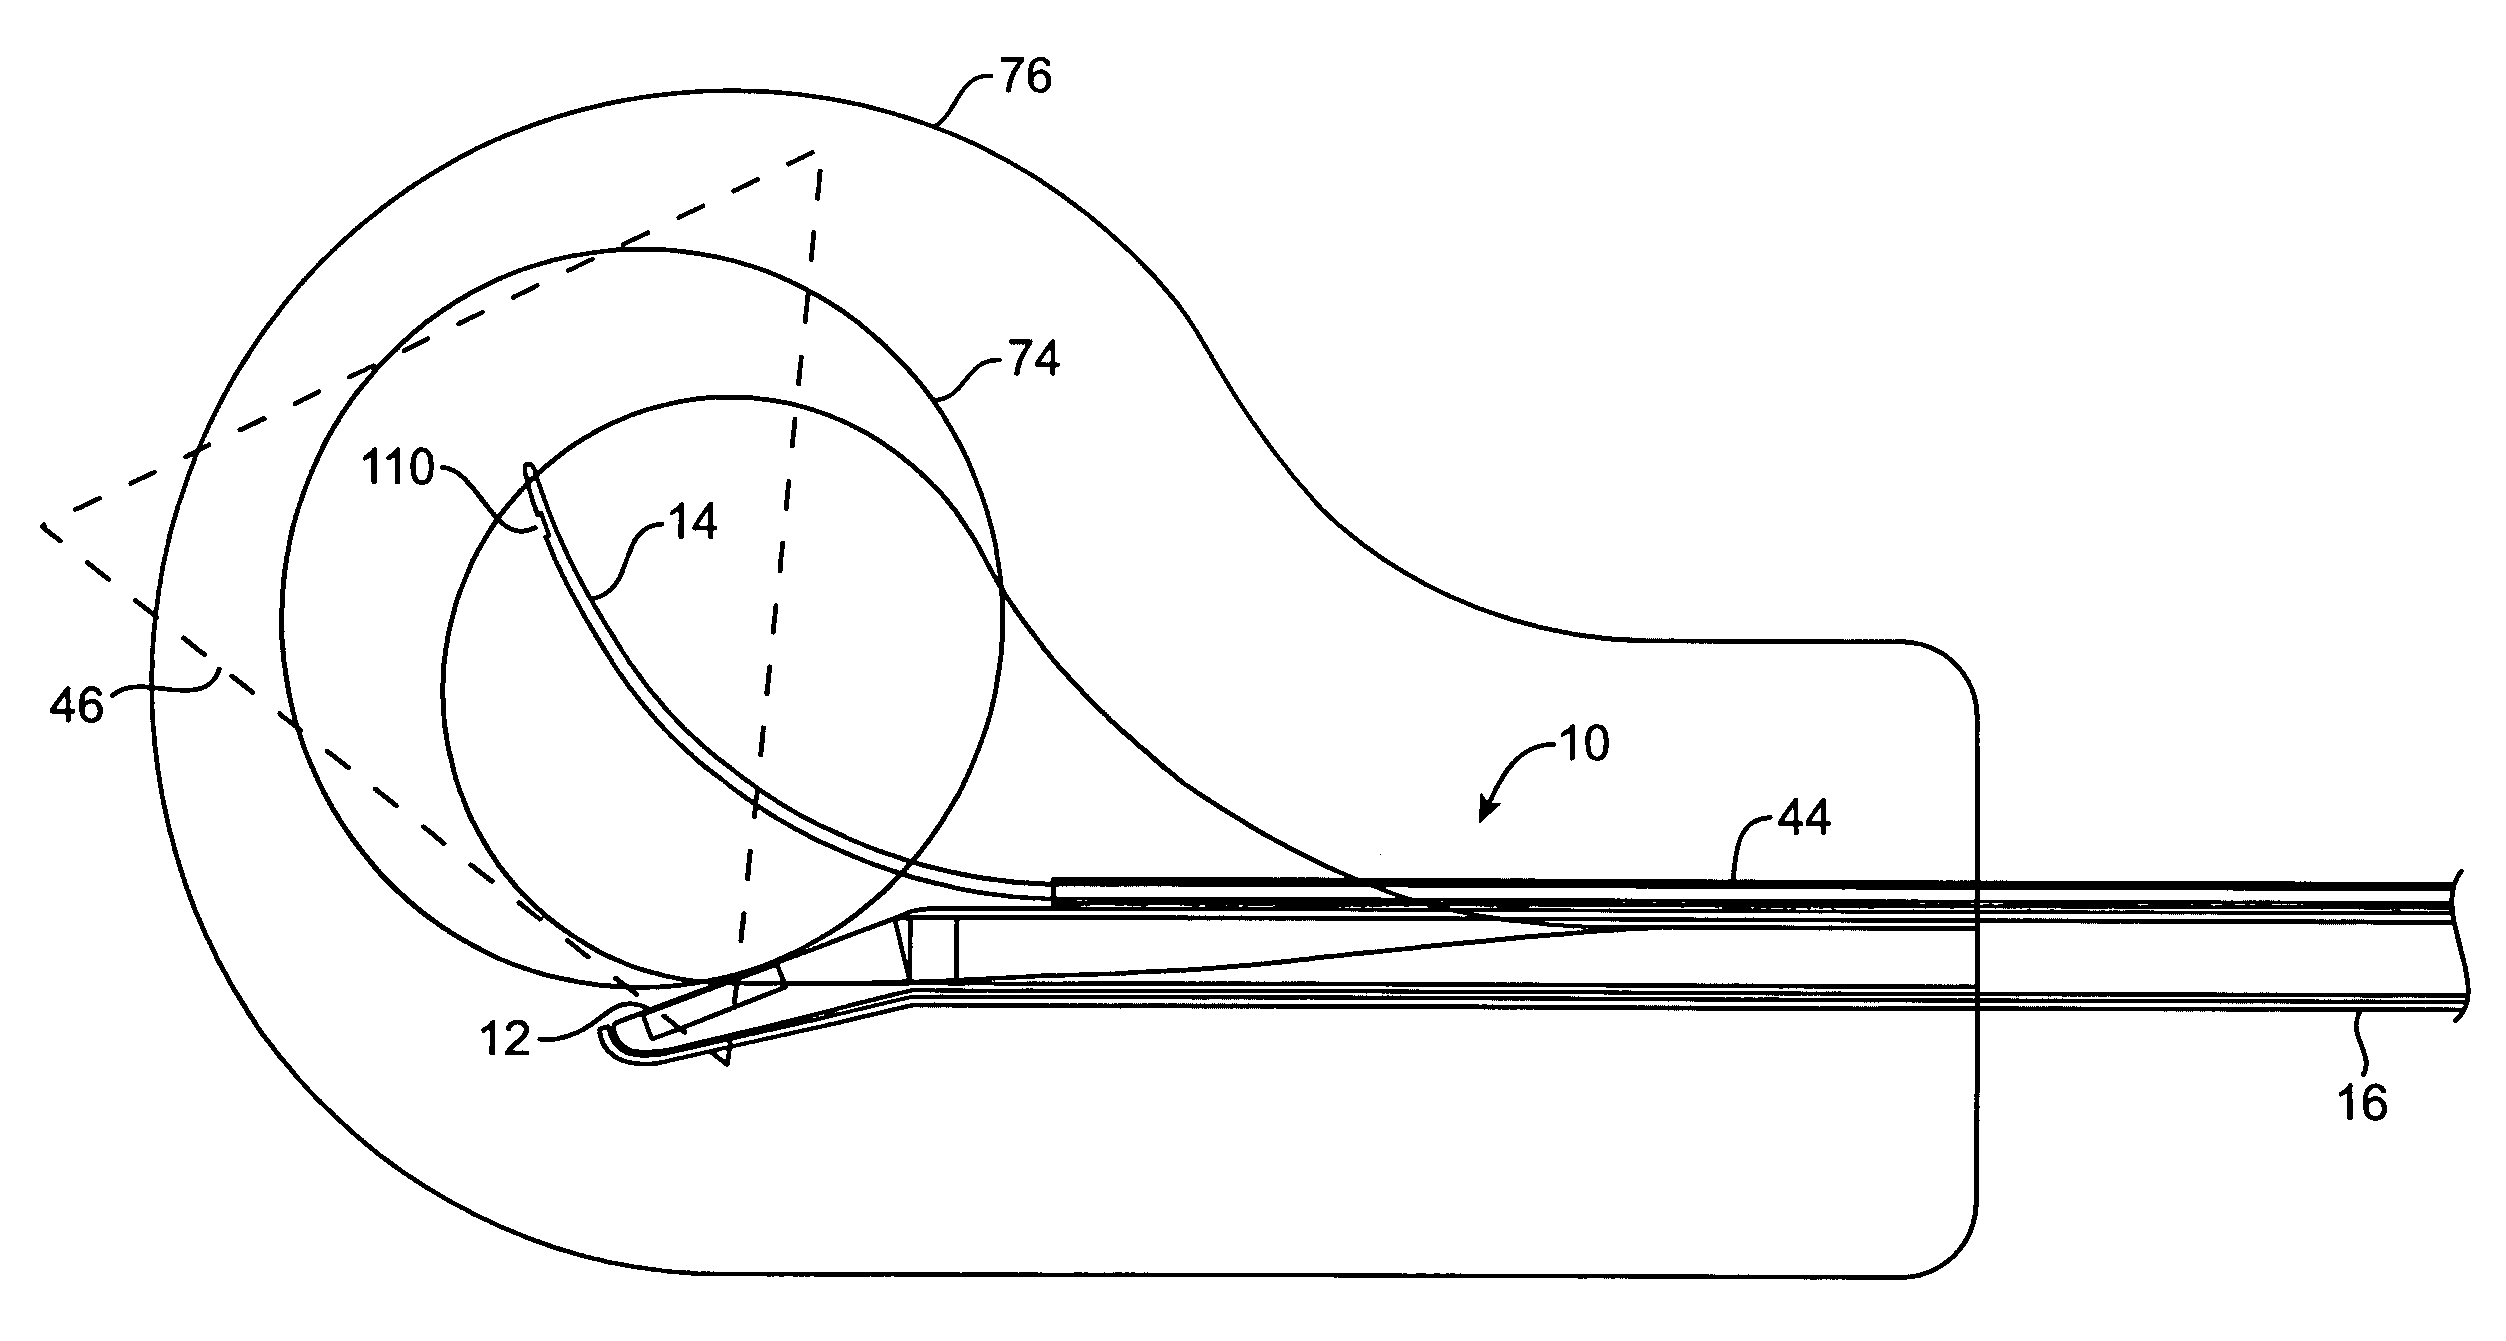 Systems and methods for deploying echogenic components in ultrasonic imaging fields